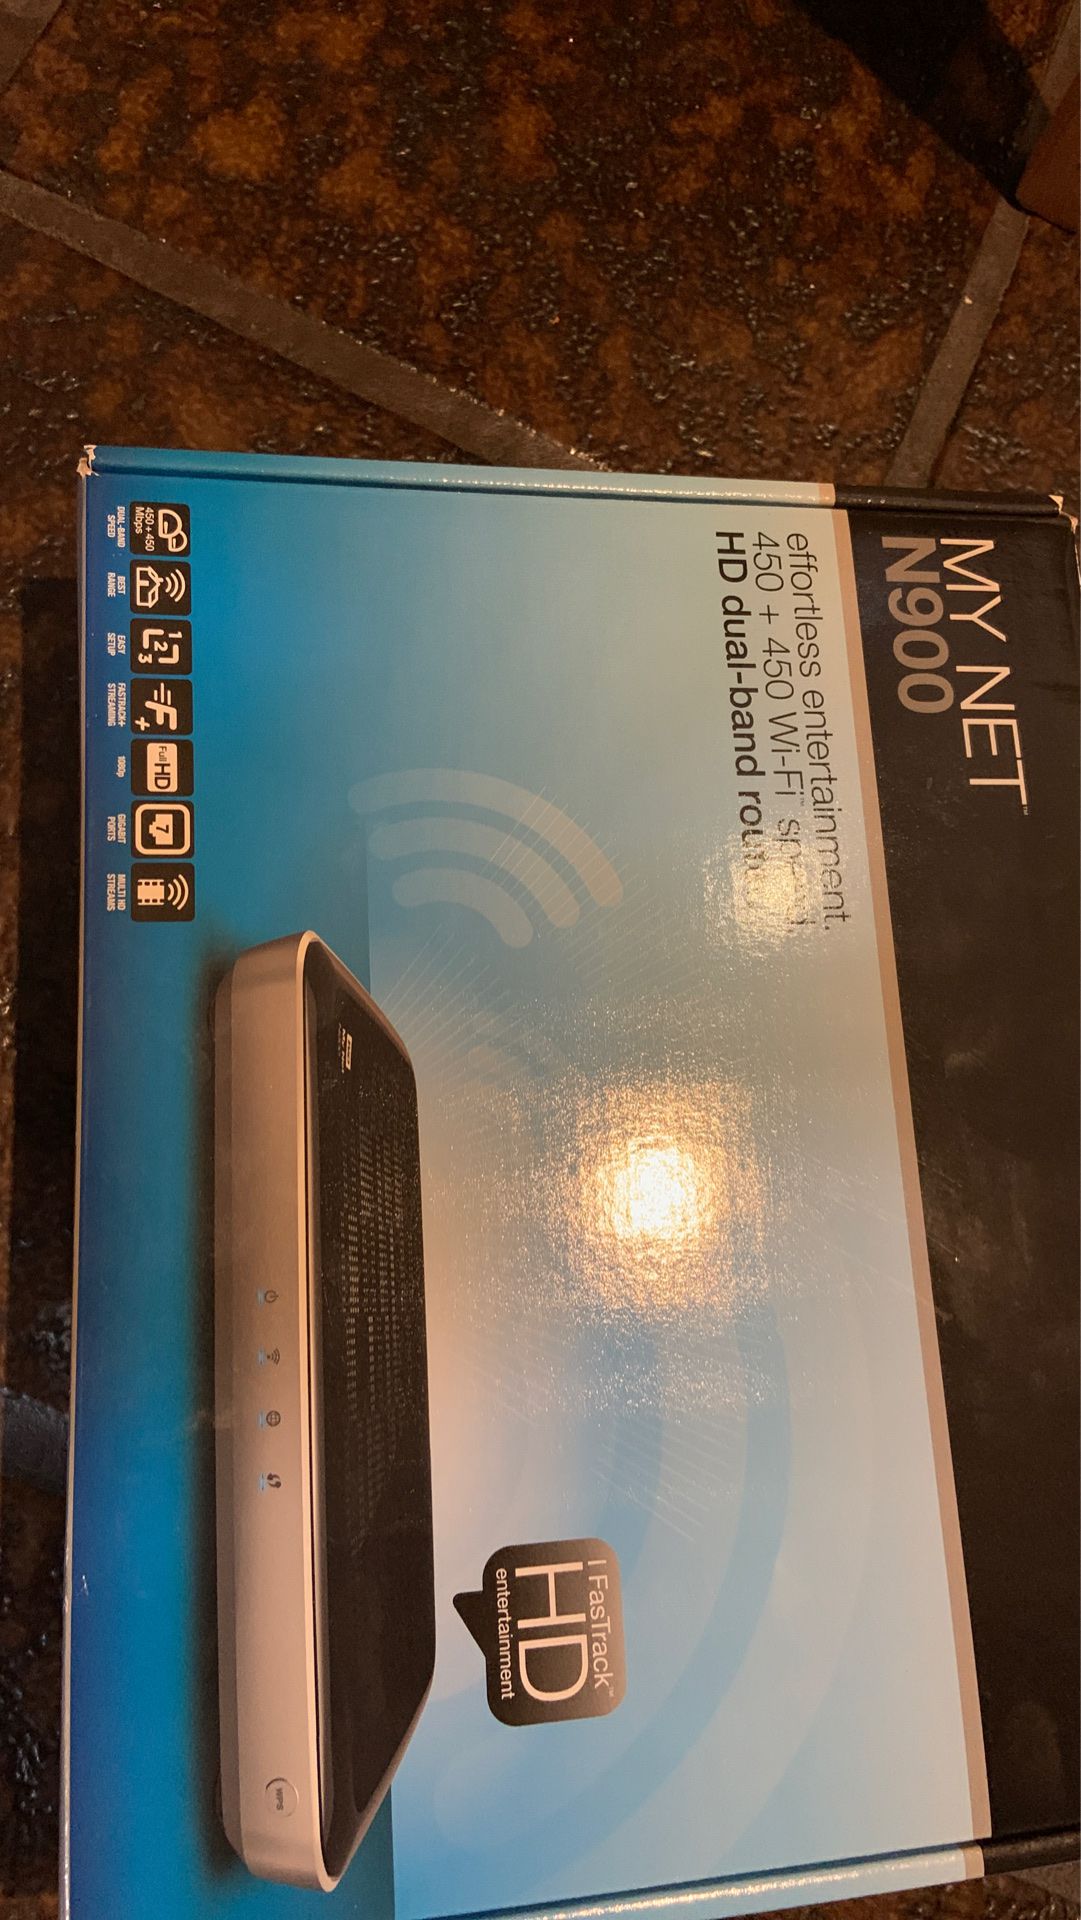 450 Wi Fi speed HD dual band router NEW in box